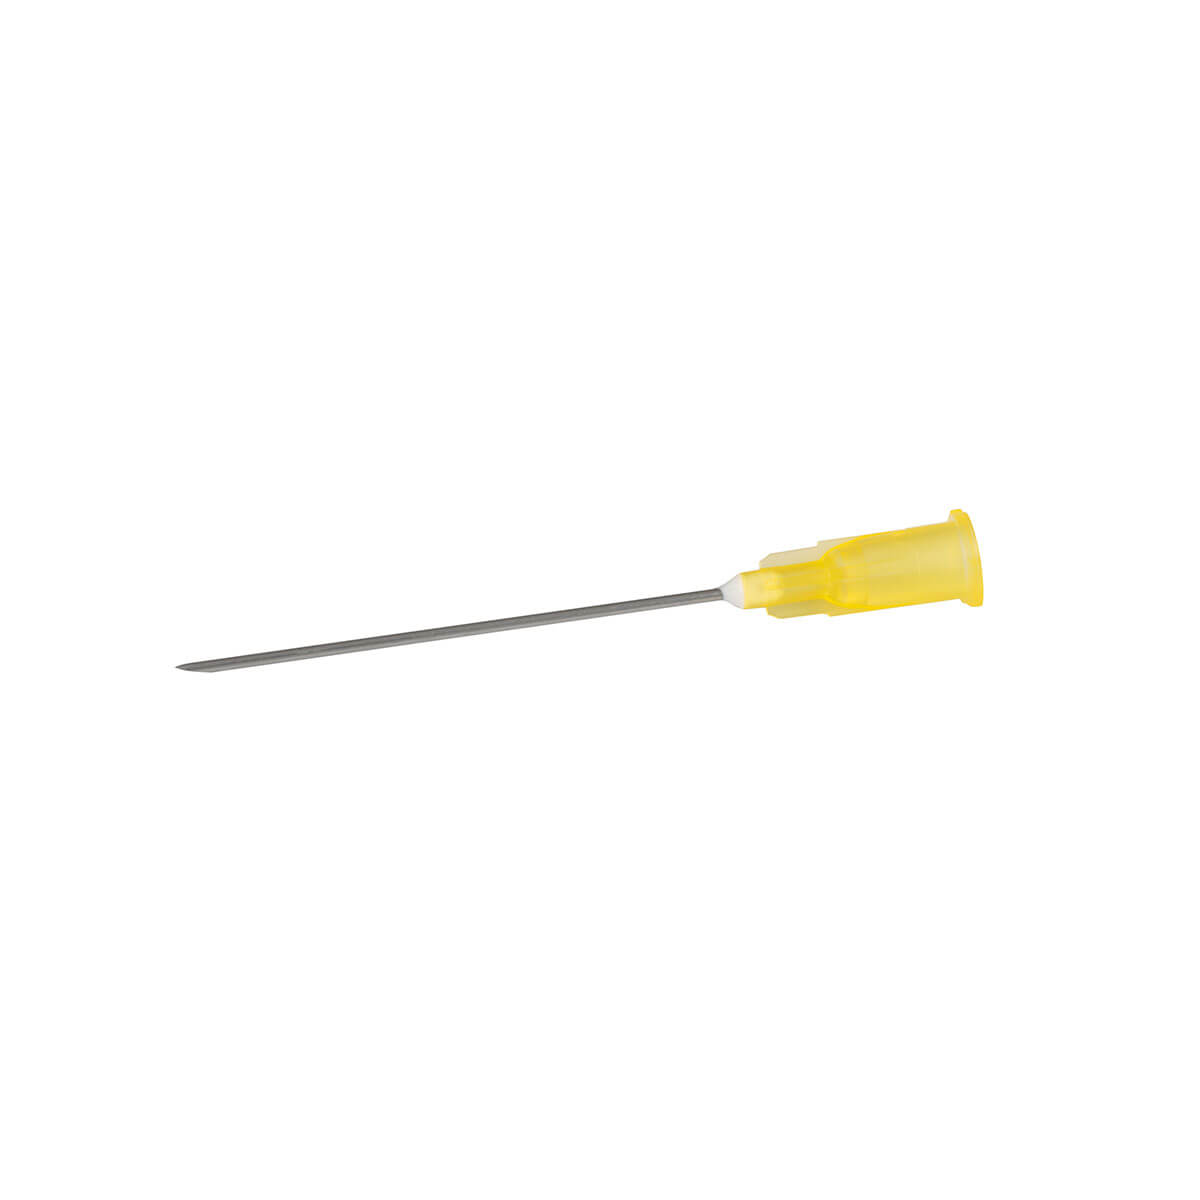 Neopoint Needle Yellow 20G 40MM